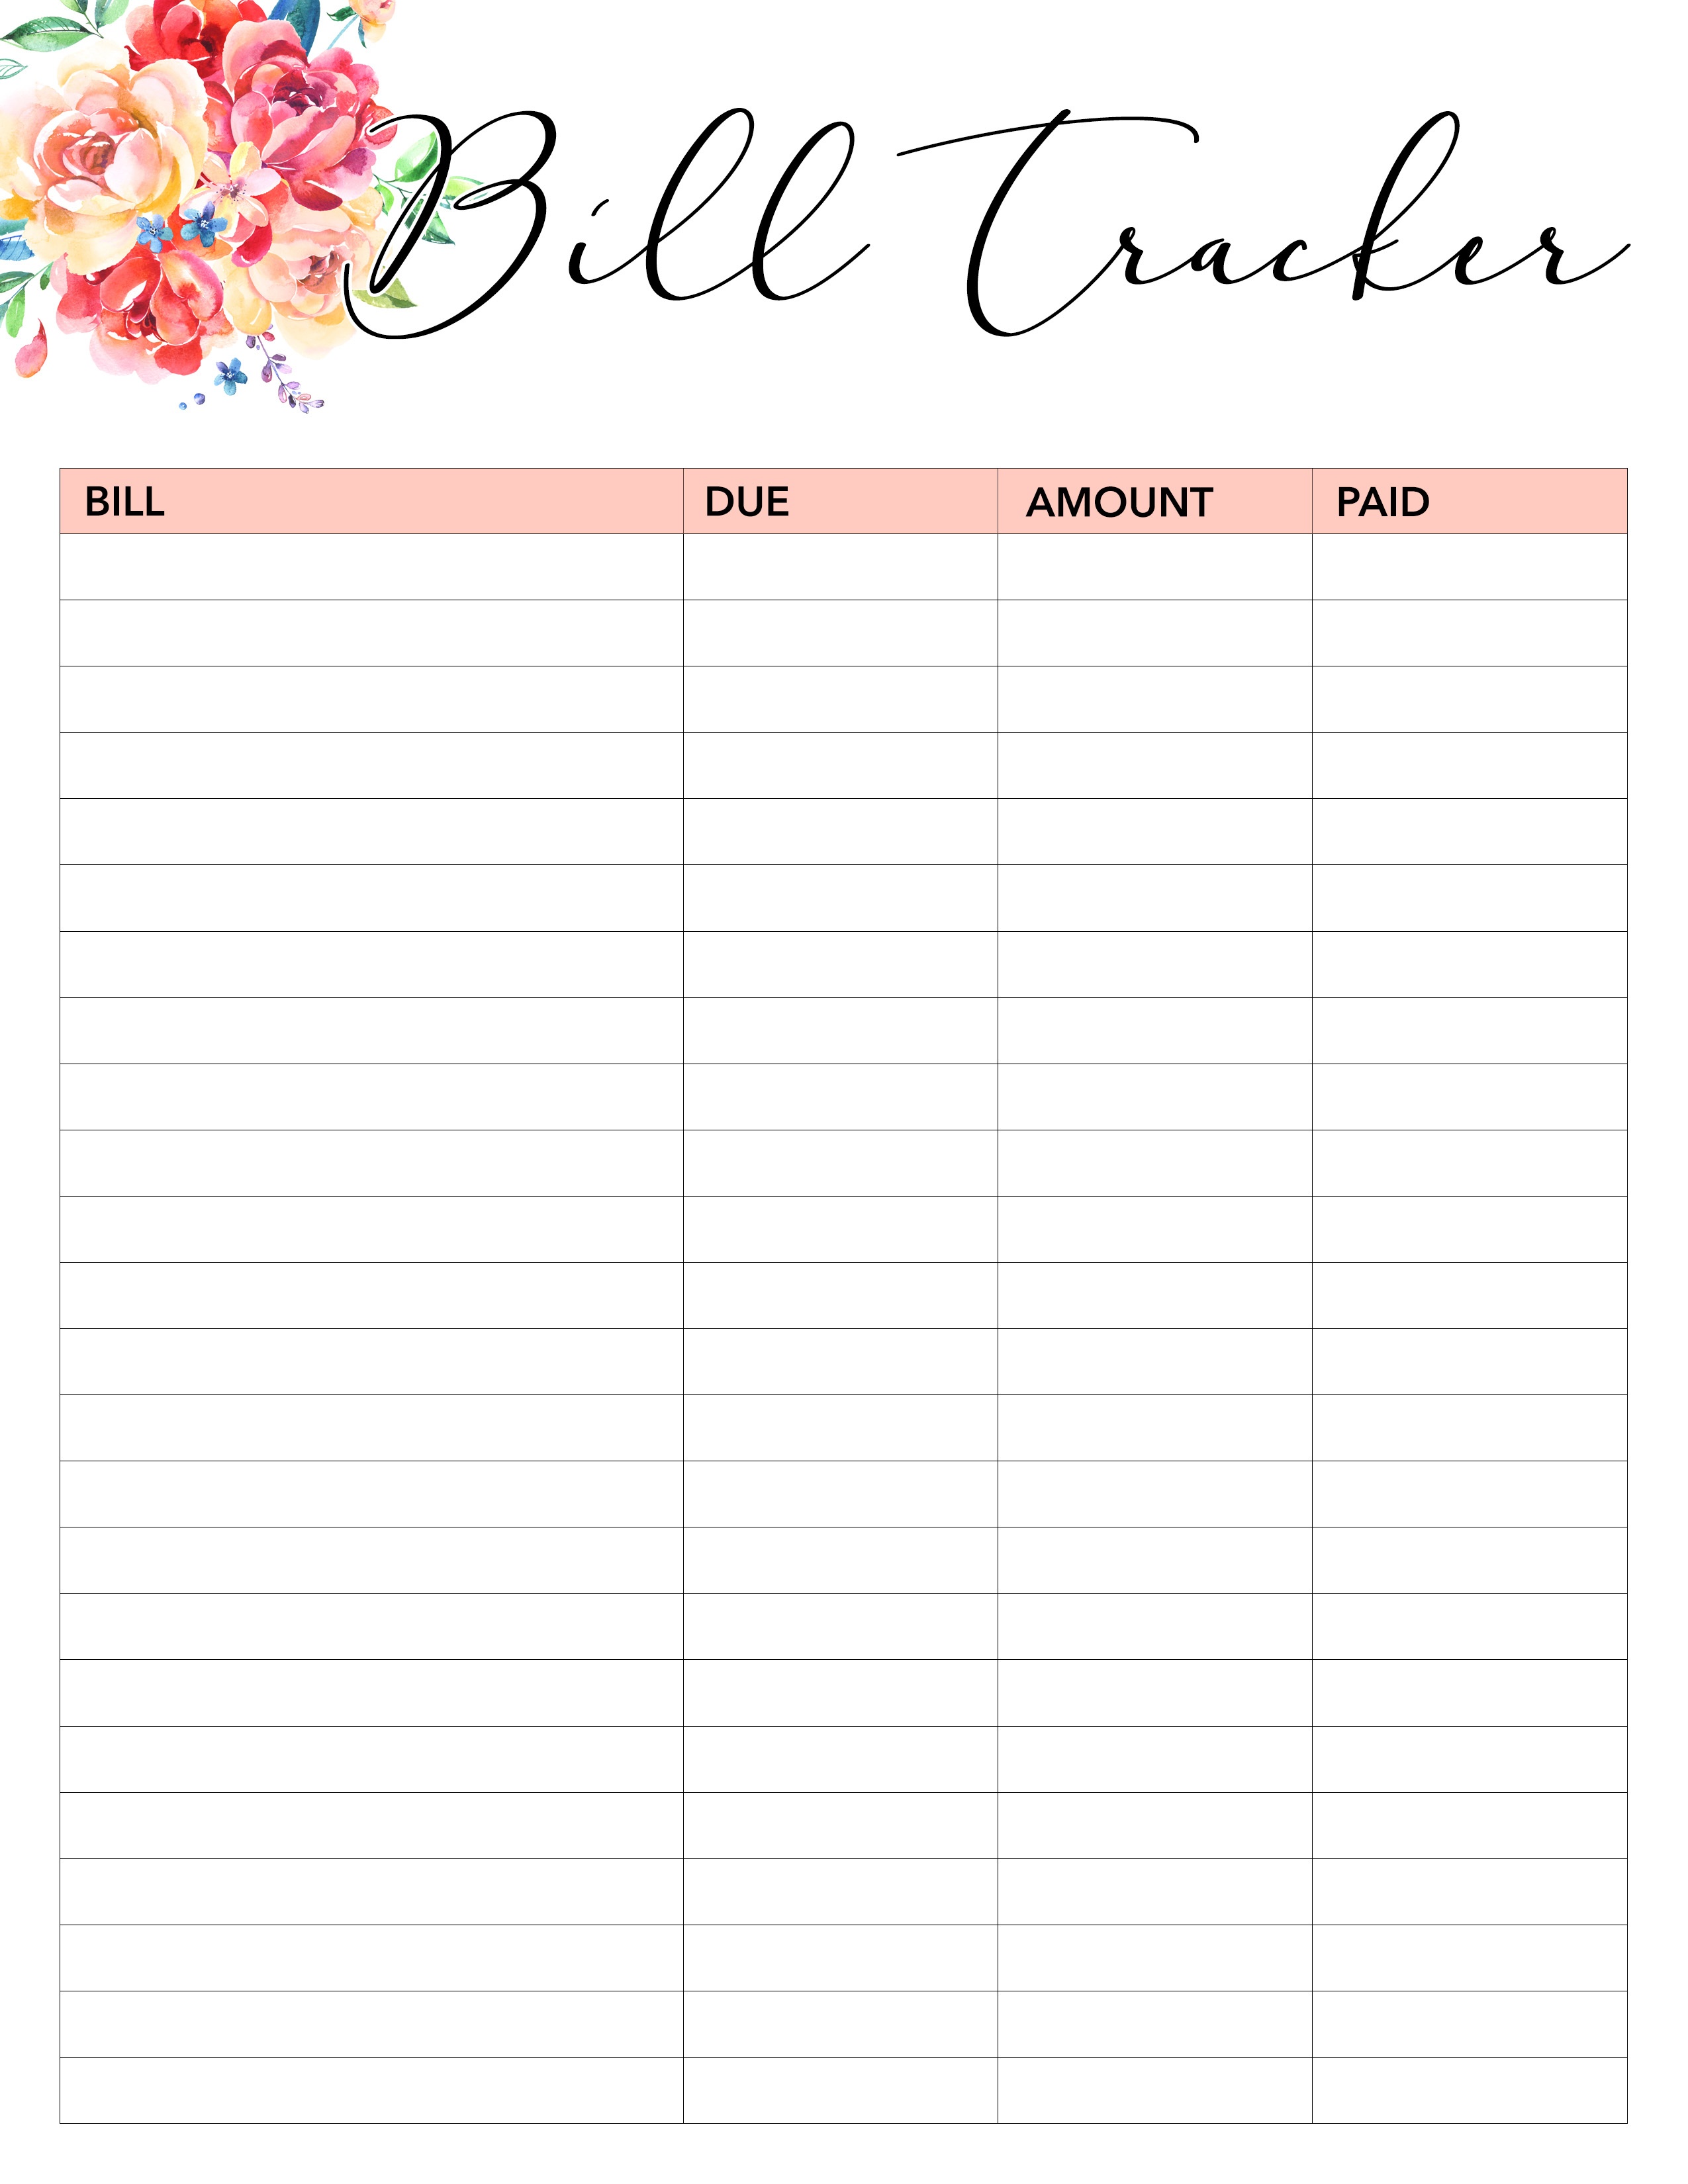 Free Printable Bill Tracker (74  Images In Collection) Page 1 Free